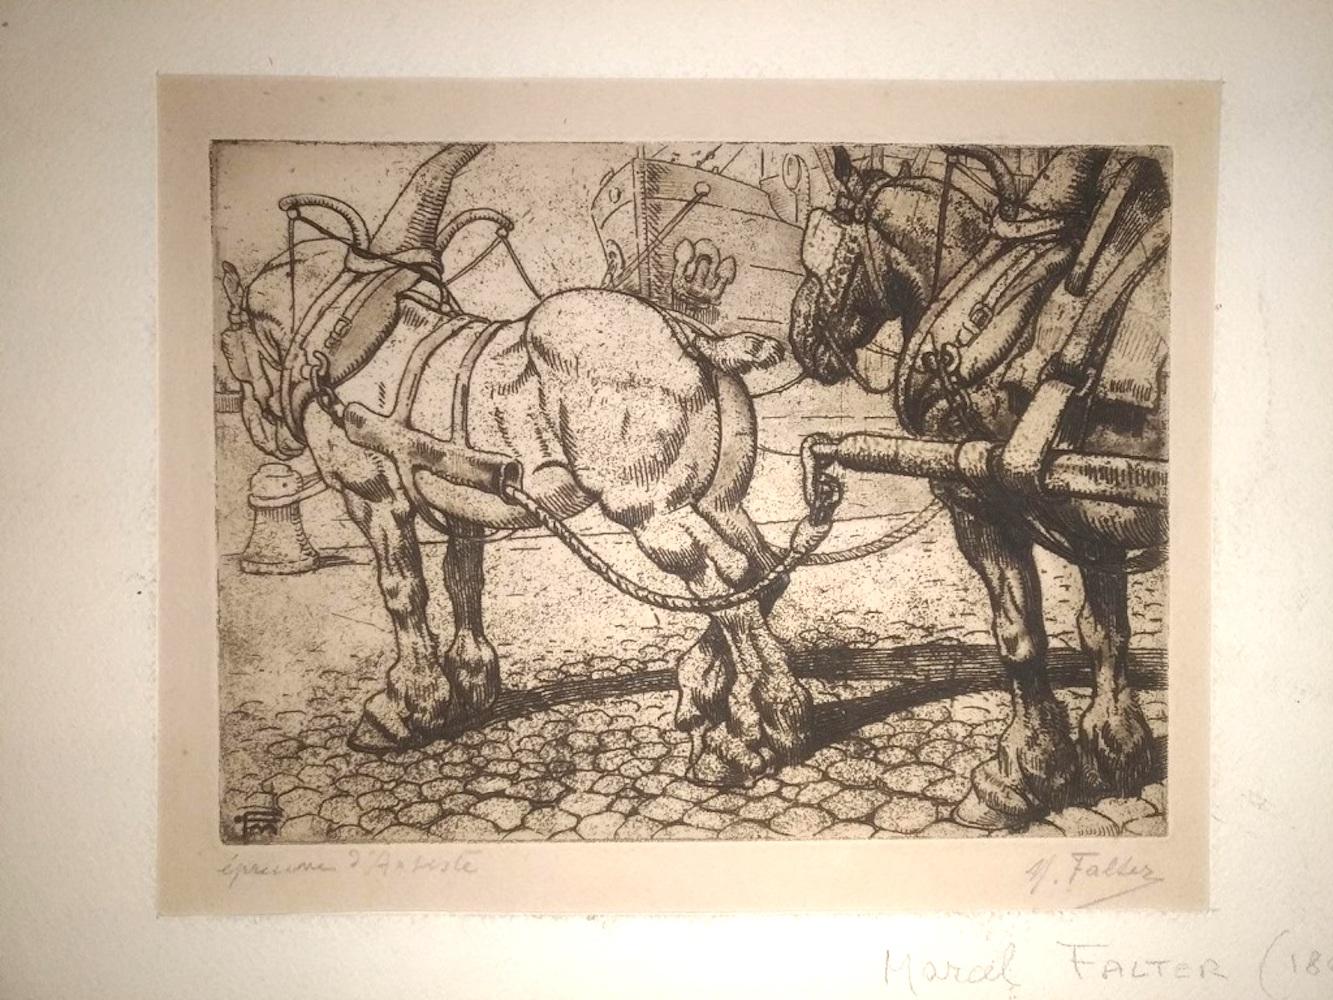 The Plow - Original Etching by M. Falter - 1920 ca.